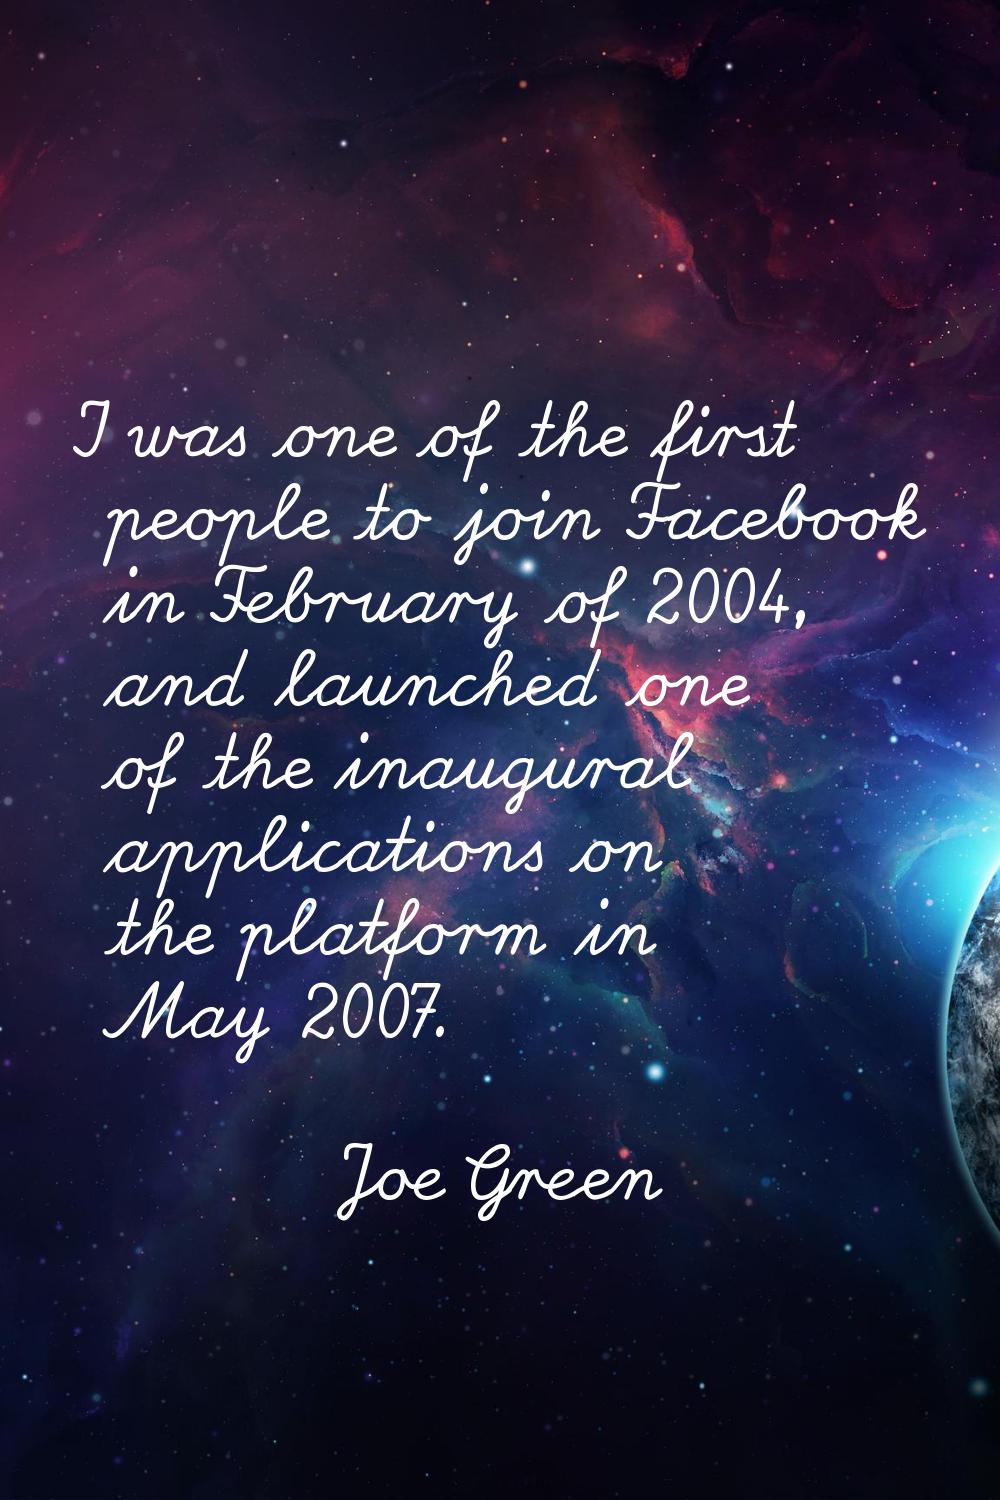 I was one of the first people to join Facebook in February of 2004, and launched one of the inaugur